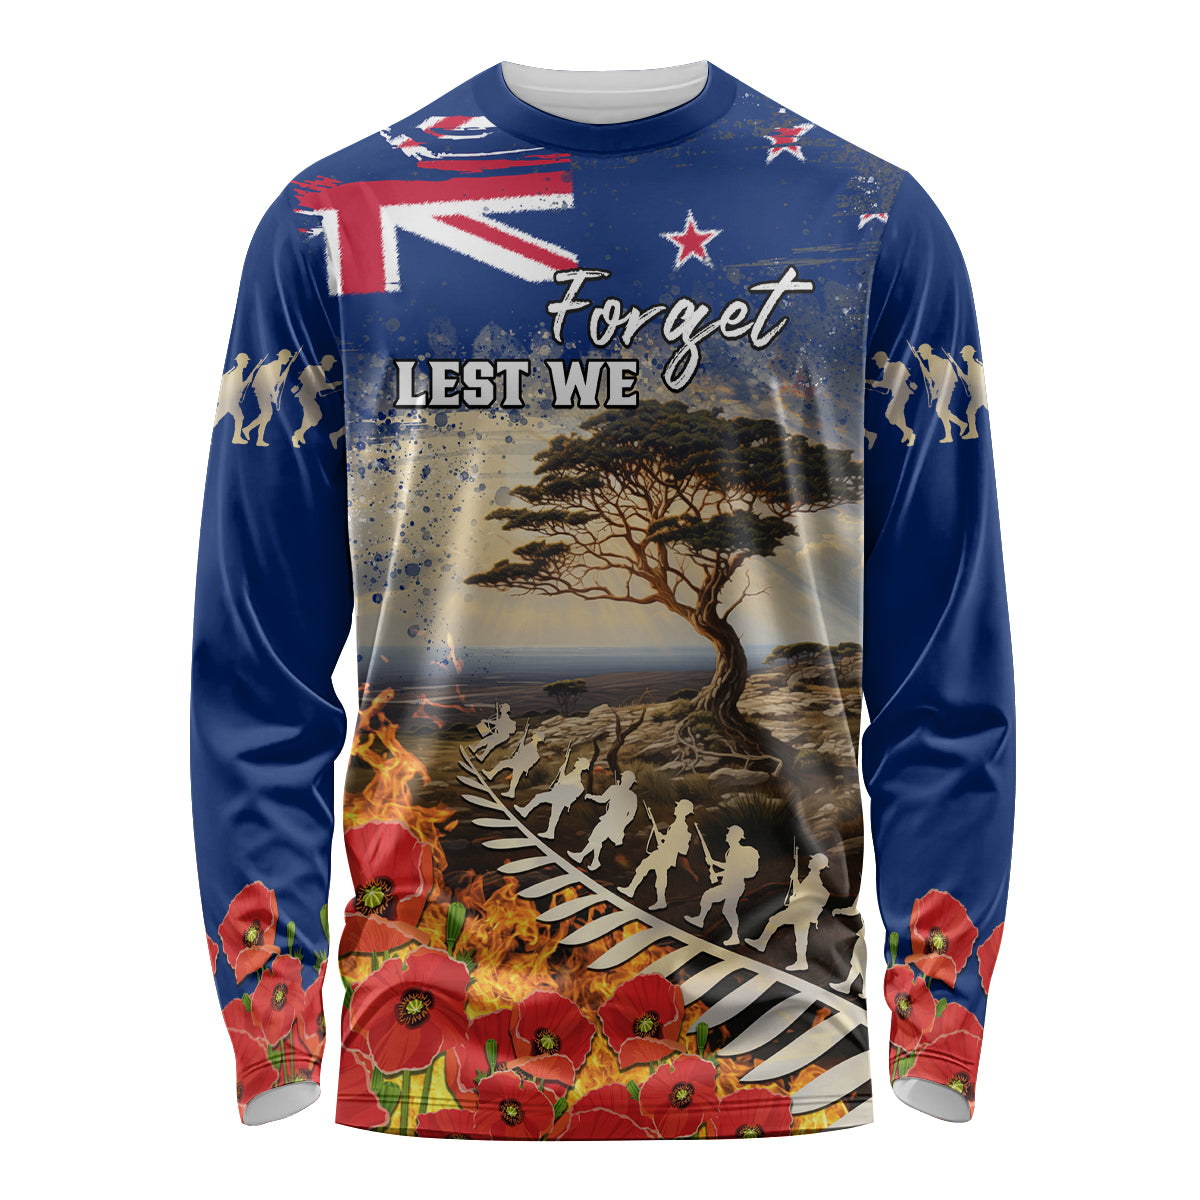 New Zealand ANZAC Day Long Sleeve Shirt The Lonesome Pine With Soldier Fern LT05 Unisex Blue - Polynesian Pride